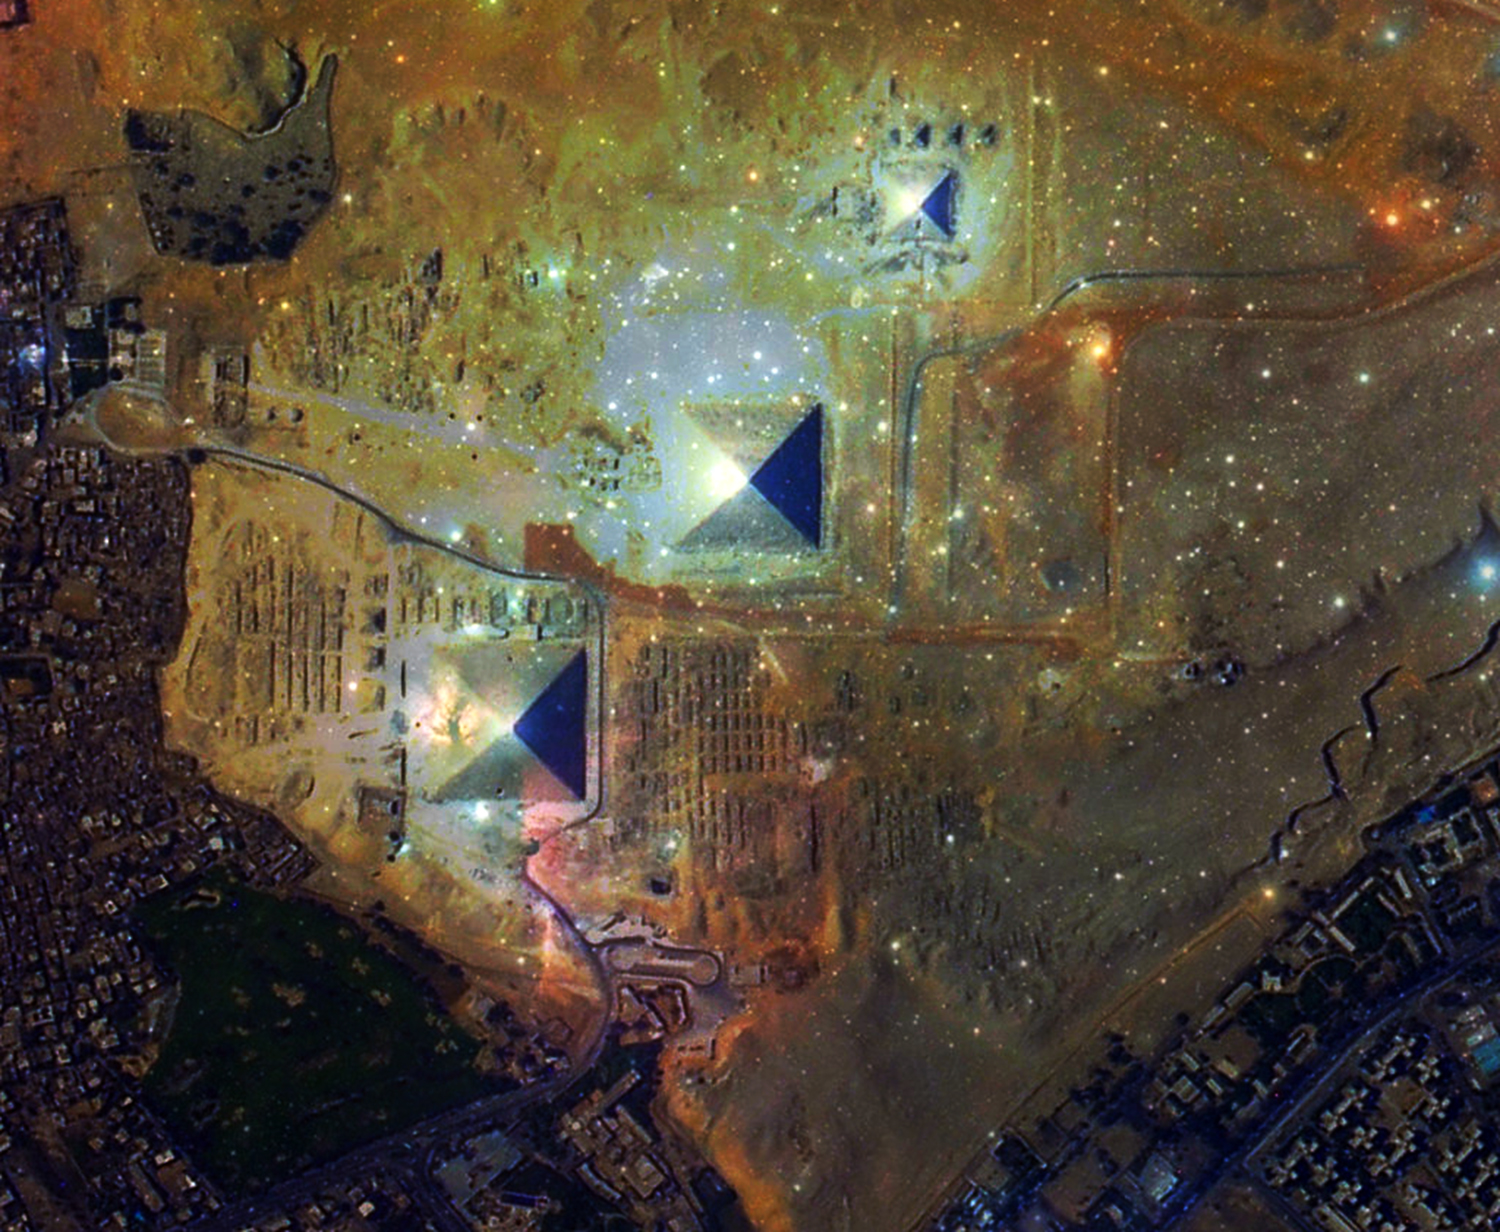 Orion's Belt superimposed on the Giza pyramid complex with Alnitak on the Great Pyramid of Giza, Alnilam on the pyramid of Khafre, Mintake on the pyramid of Menkaure,illustrating the Orion Correlation Theory.